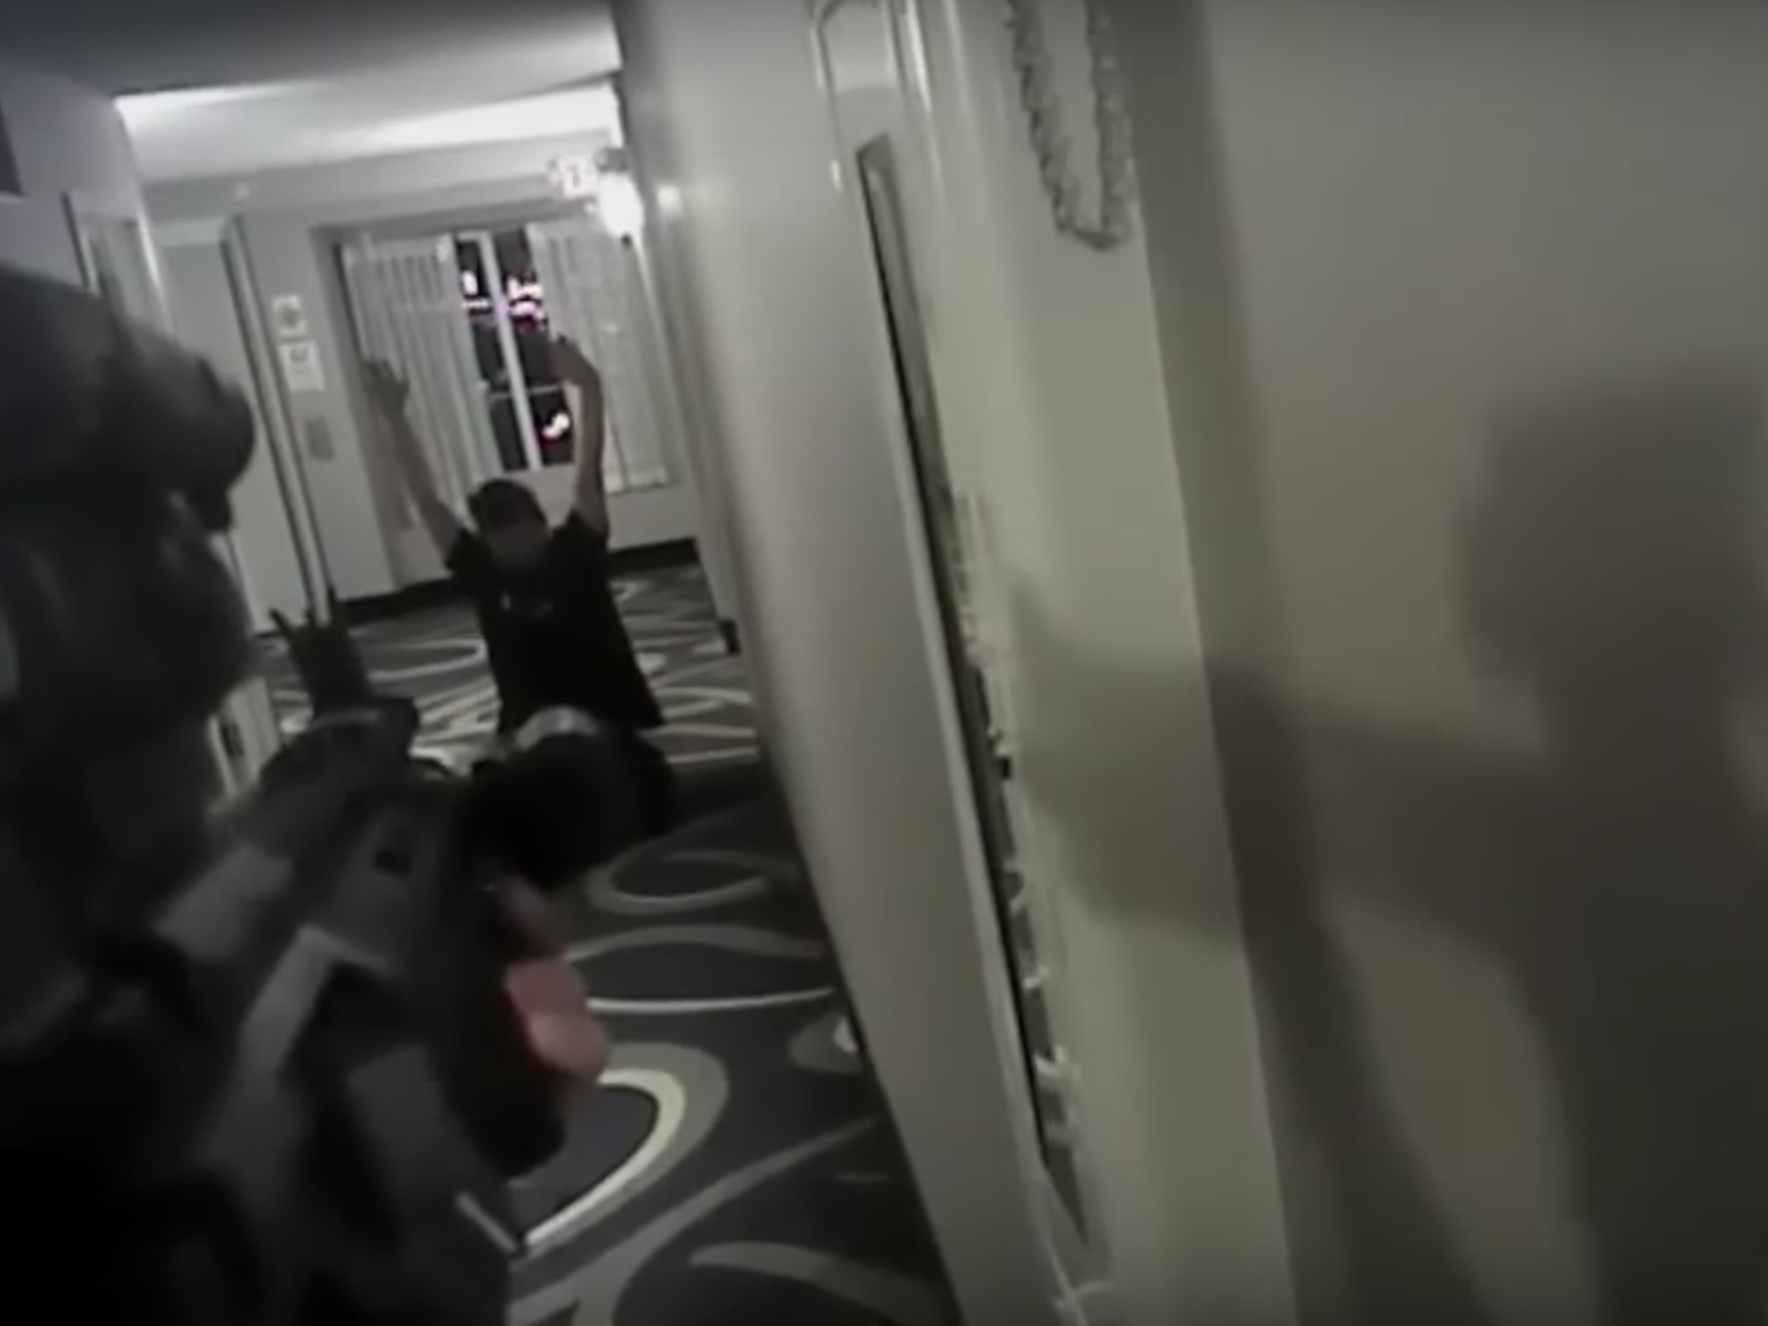 Body cam footage shows the moments before Daniel Shaver is killed